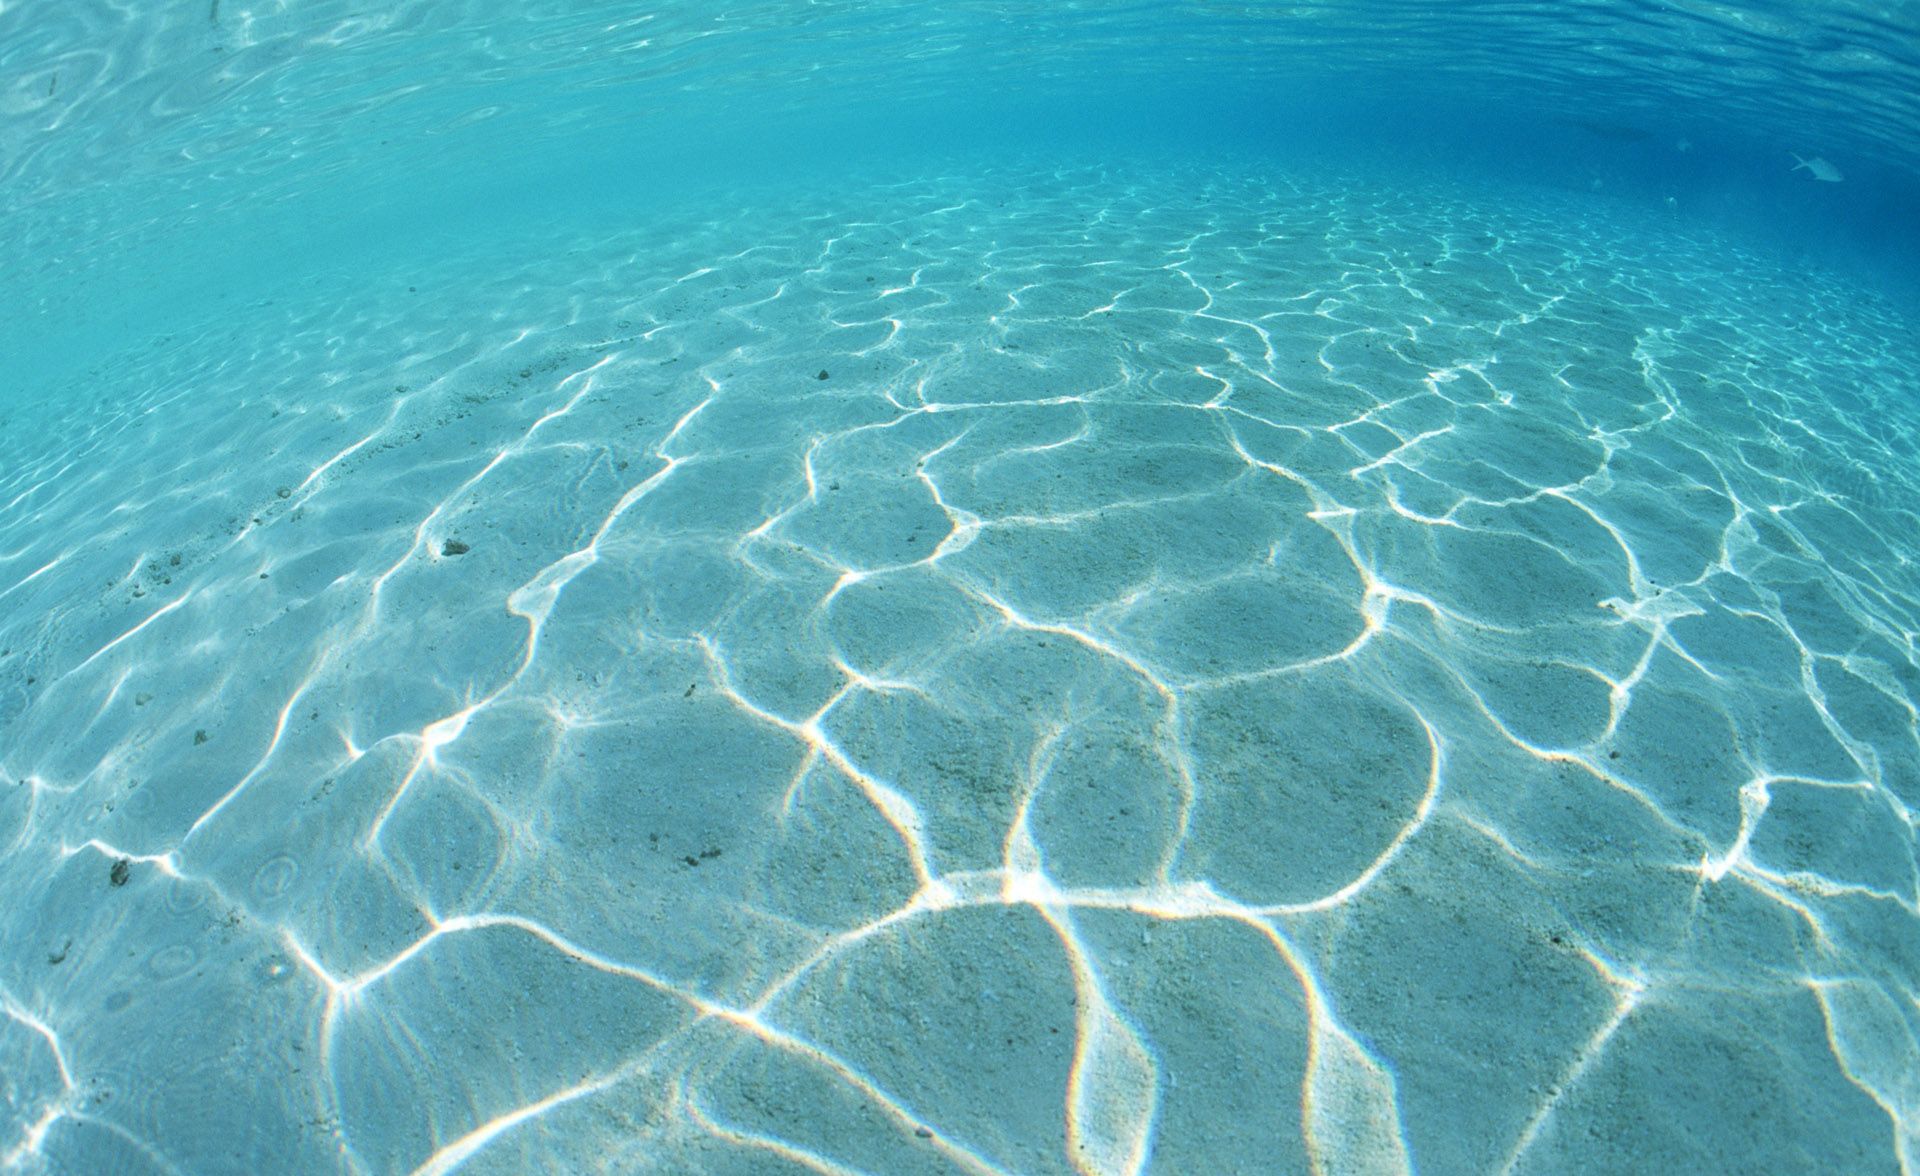 A sandy sea bed with clear blue water - Underwater